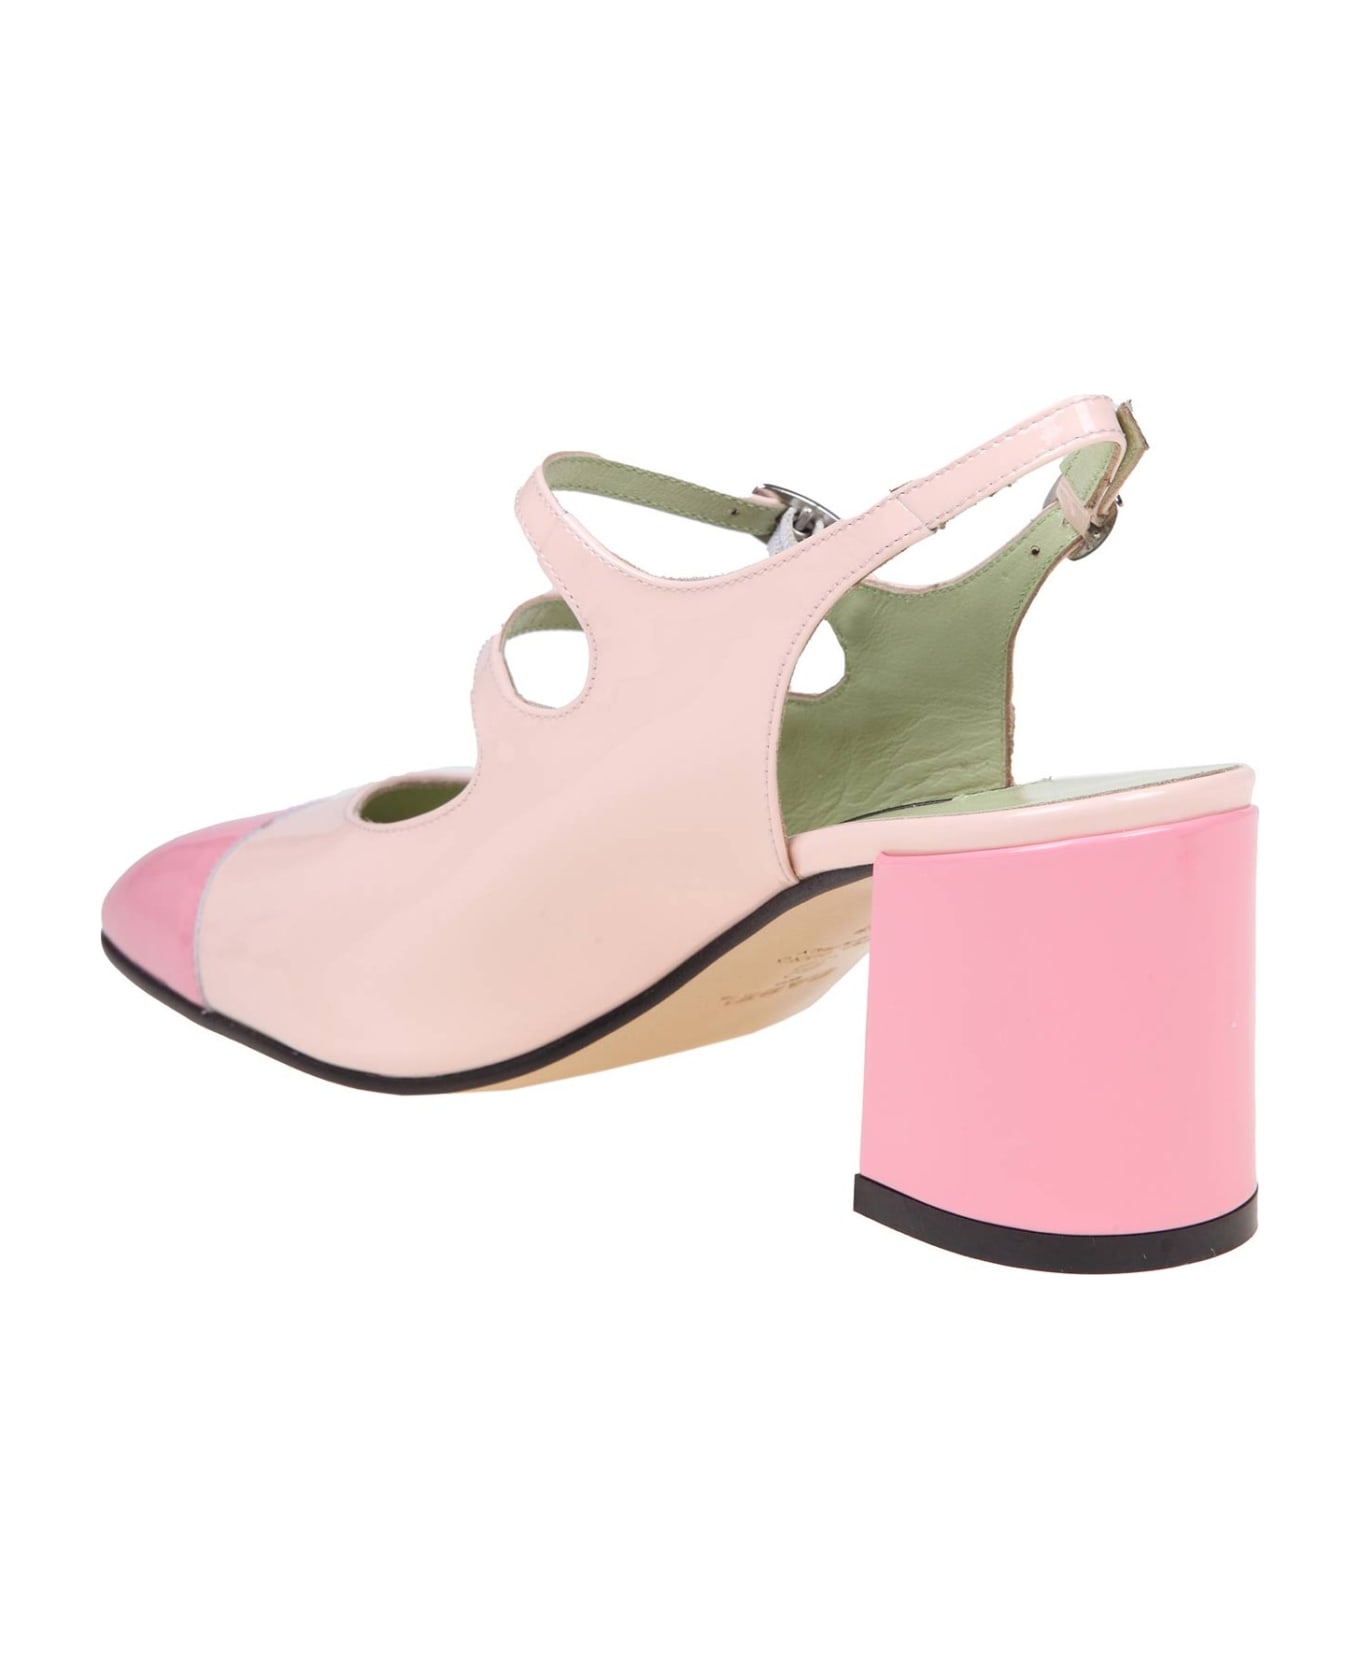 Carel Slingback Papaya In Pink Paint Leather - Pink